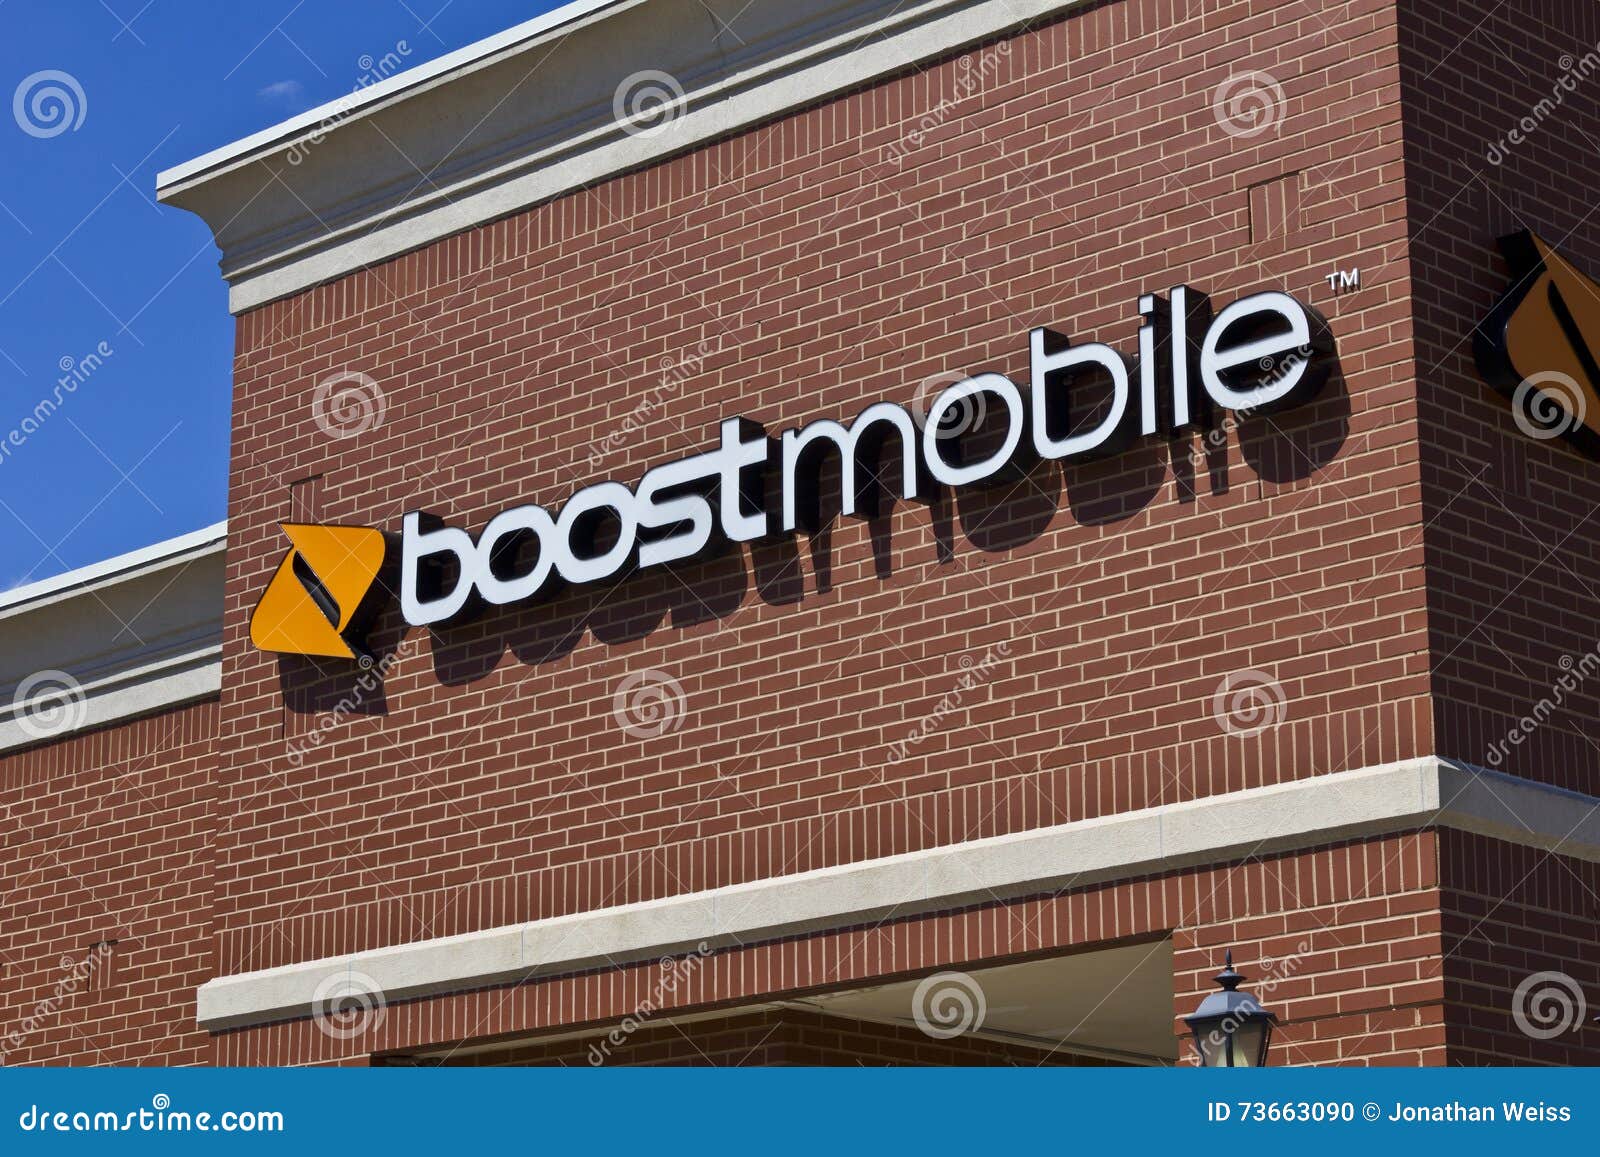 Indianapolis - Circa June 2016: Boost Mobile Cell Phone Retail Location